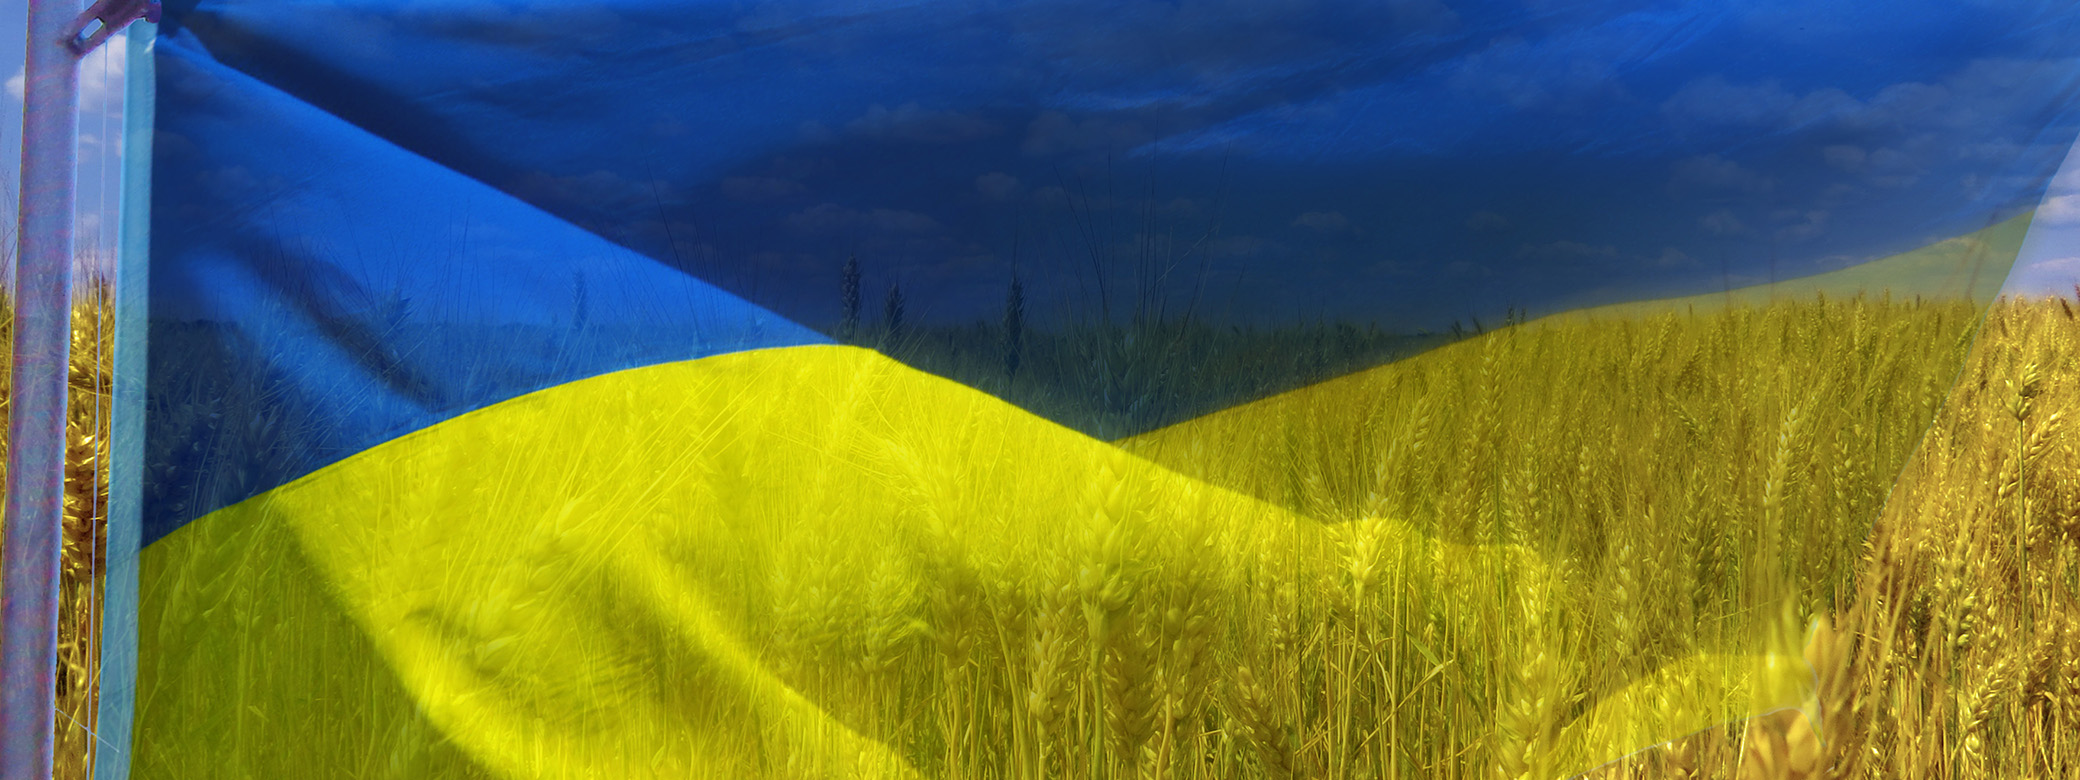 Ukrainian flag, with crops in field behind